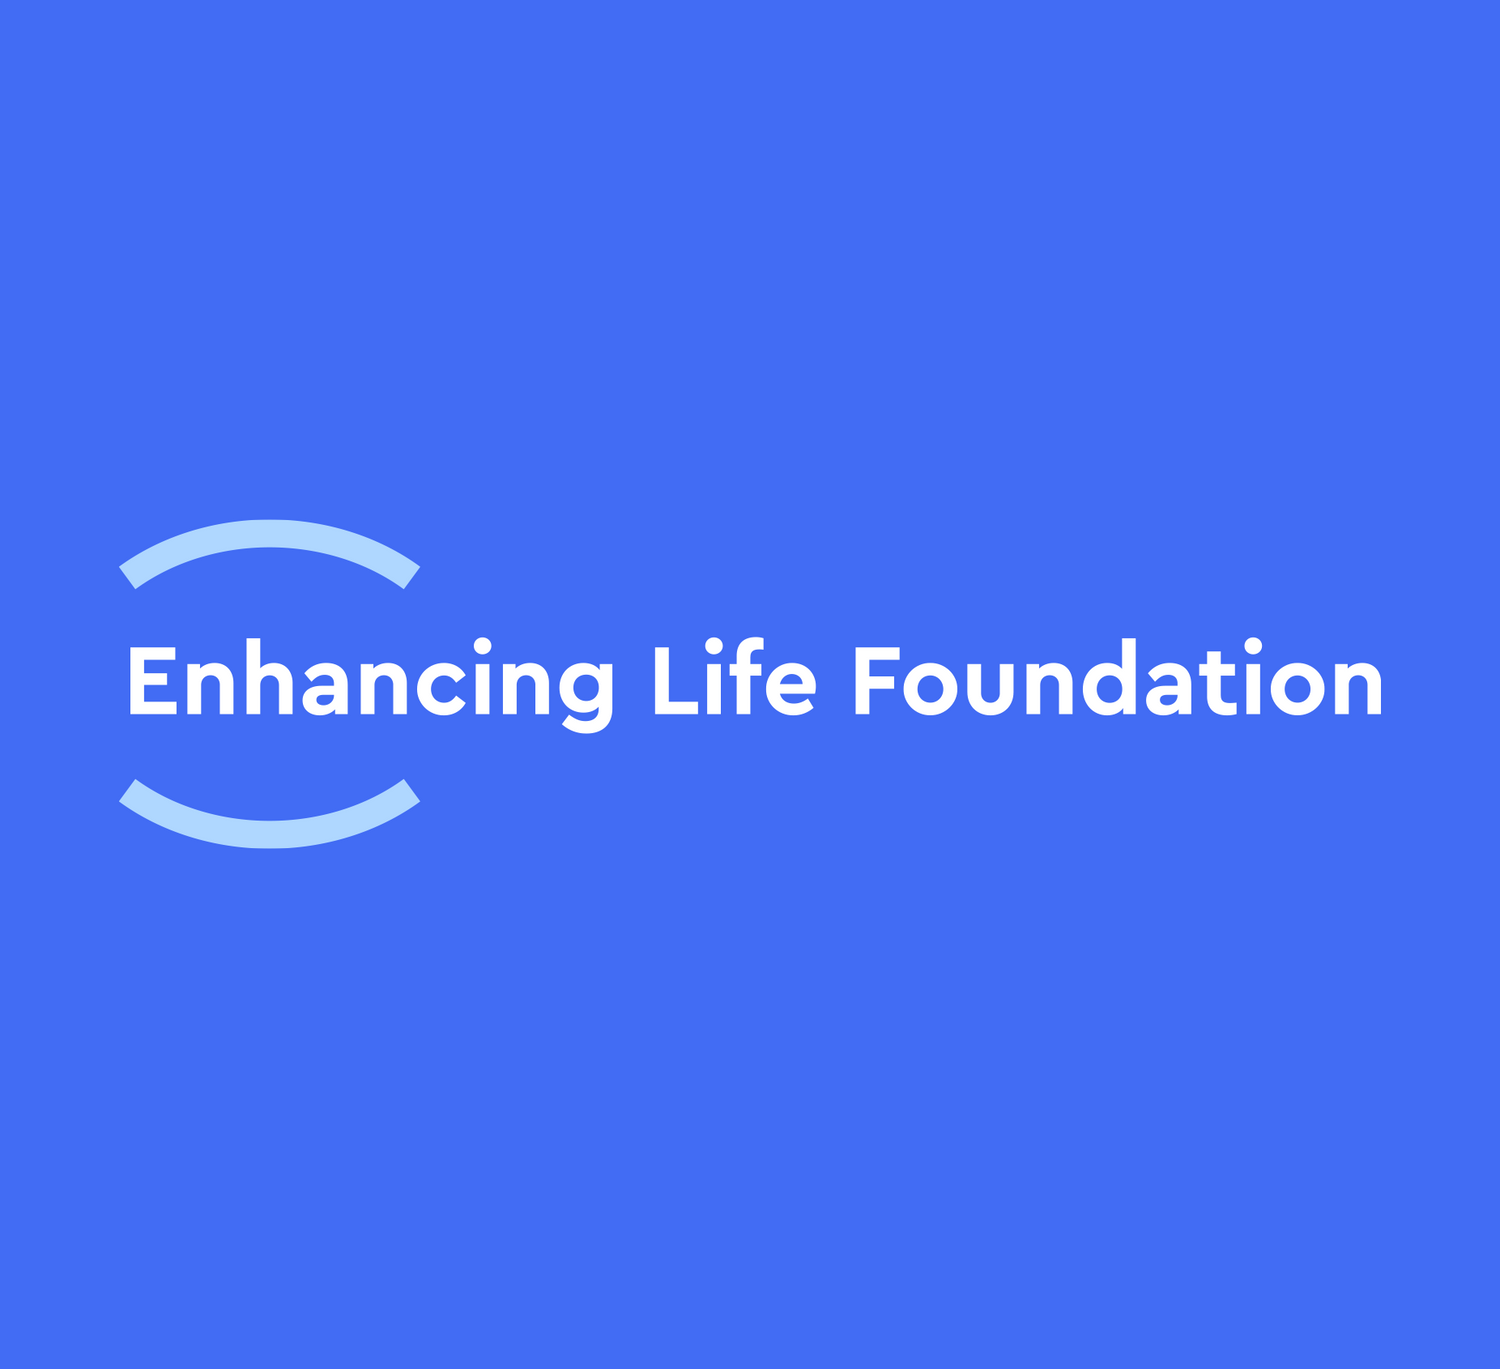 Enhancing Life Foundation a community initiative by Fyidoctor and Visique for better vision